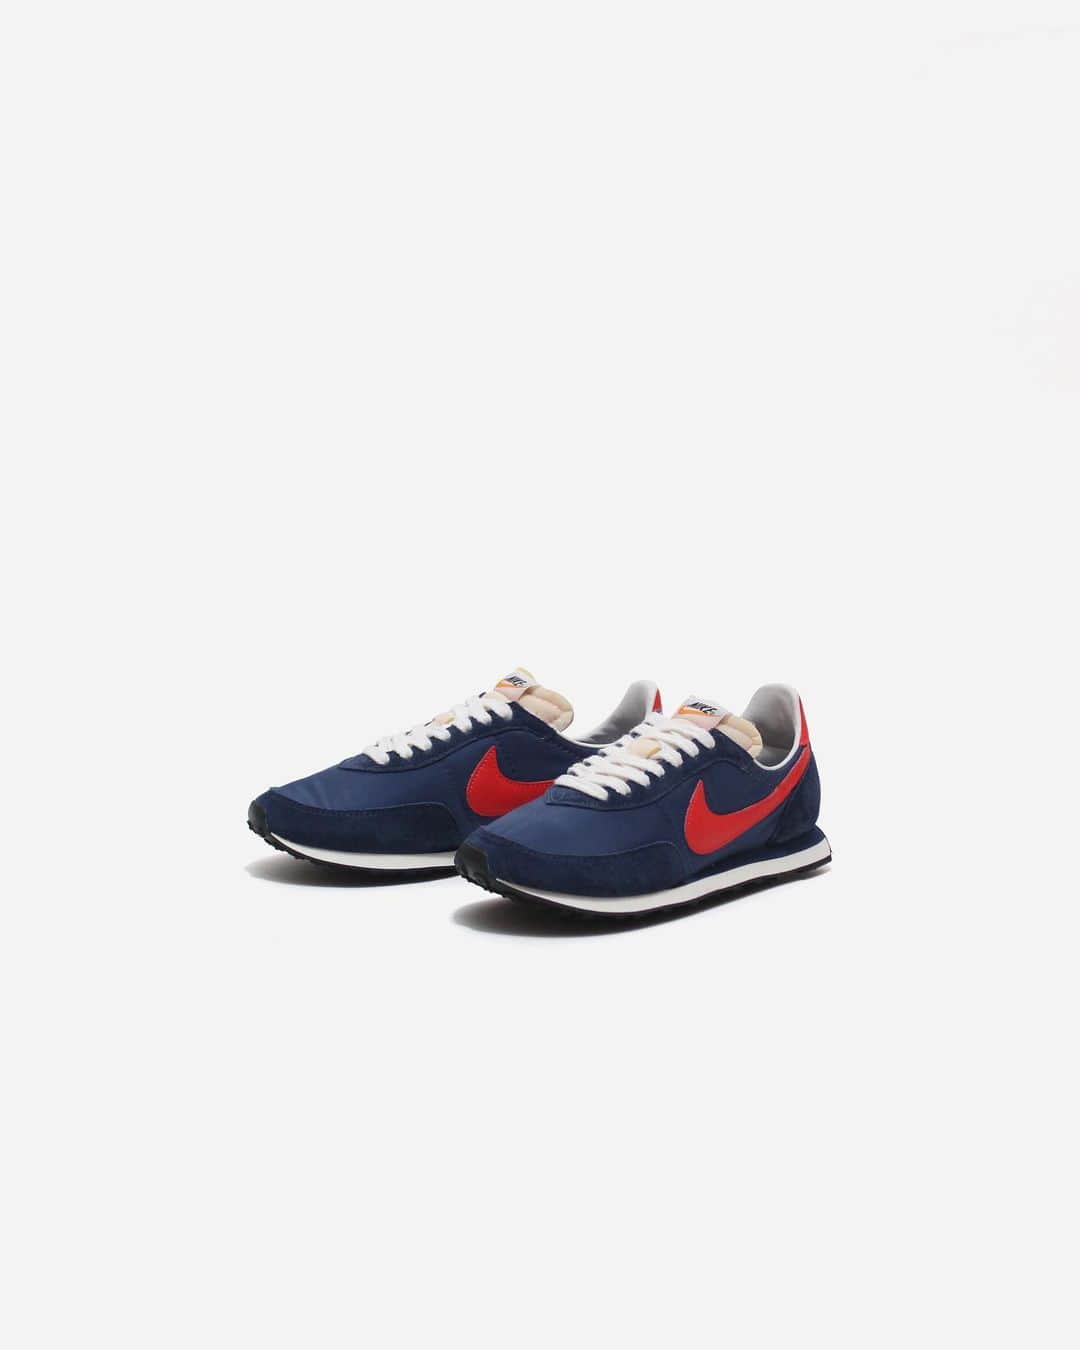 A+Sのインスタグラム：「2021. 2. 25 (thu) in store ﻿ ■NIKE WAFFLE TRAINER 2 SP﻿ COLOR : MIDNIGHT NAVY/MAX ORANGE-MYSTIC NAVY﻿ SIZE : 26.0cm-29.0cm﻿ PRICE : ¥12,100 (tax incl.) ﻿ モカシンをイメージしたアッパーとワッフルアウトソールが、1977年のオリジナルを彷彿とさせるワッフル トレーナー 2。ウエッジミッドソールで伝説のシルエットを強化しつつ、形状記憶フォームのソックライナーや密度の異なる2種類のフォームミッドソールを採用して、最新のアップデートを施した。世界レベルの職人技を駆使したナイロンとスエードの組み合わせに、クラシックなアウトソールがあらゆる路面で耐久性に優れたトラクションを発揮する。このエディションでは、ベースカラーのミッドナイトネイビーに、マックスオレンジがエネルギッシュなアクセントを添える。﻿ ﻿ A waffle trainer 2 with a moccasin-inspired upper and waffle outsole that is reminiscent of the 1977 original. While enhancing the legendary silhouette with the wedge midsole, we have adopted the sockliner of shape memory foam and two types of foam midsole with different densities, and made the latest update. A combination of world-class craftsmanship in nylon and suede, the classic outsole provides durable traction on all surfaces. In this edition, Max Orange adds an energetic accent to the base color Midnight Navy.﻿ ﻿ #a_and_s﻿ #NIKE﻿ #NIKEWAFFLETRAINER﻿ #NIKEWAFFLETRAINER2SP」